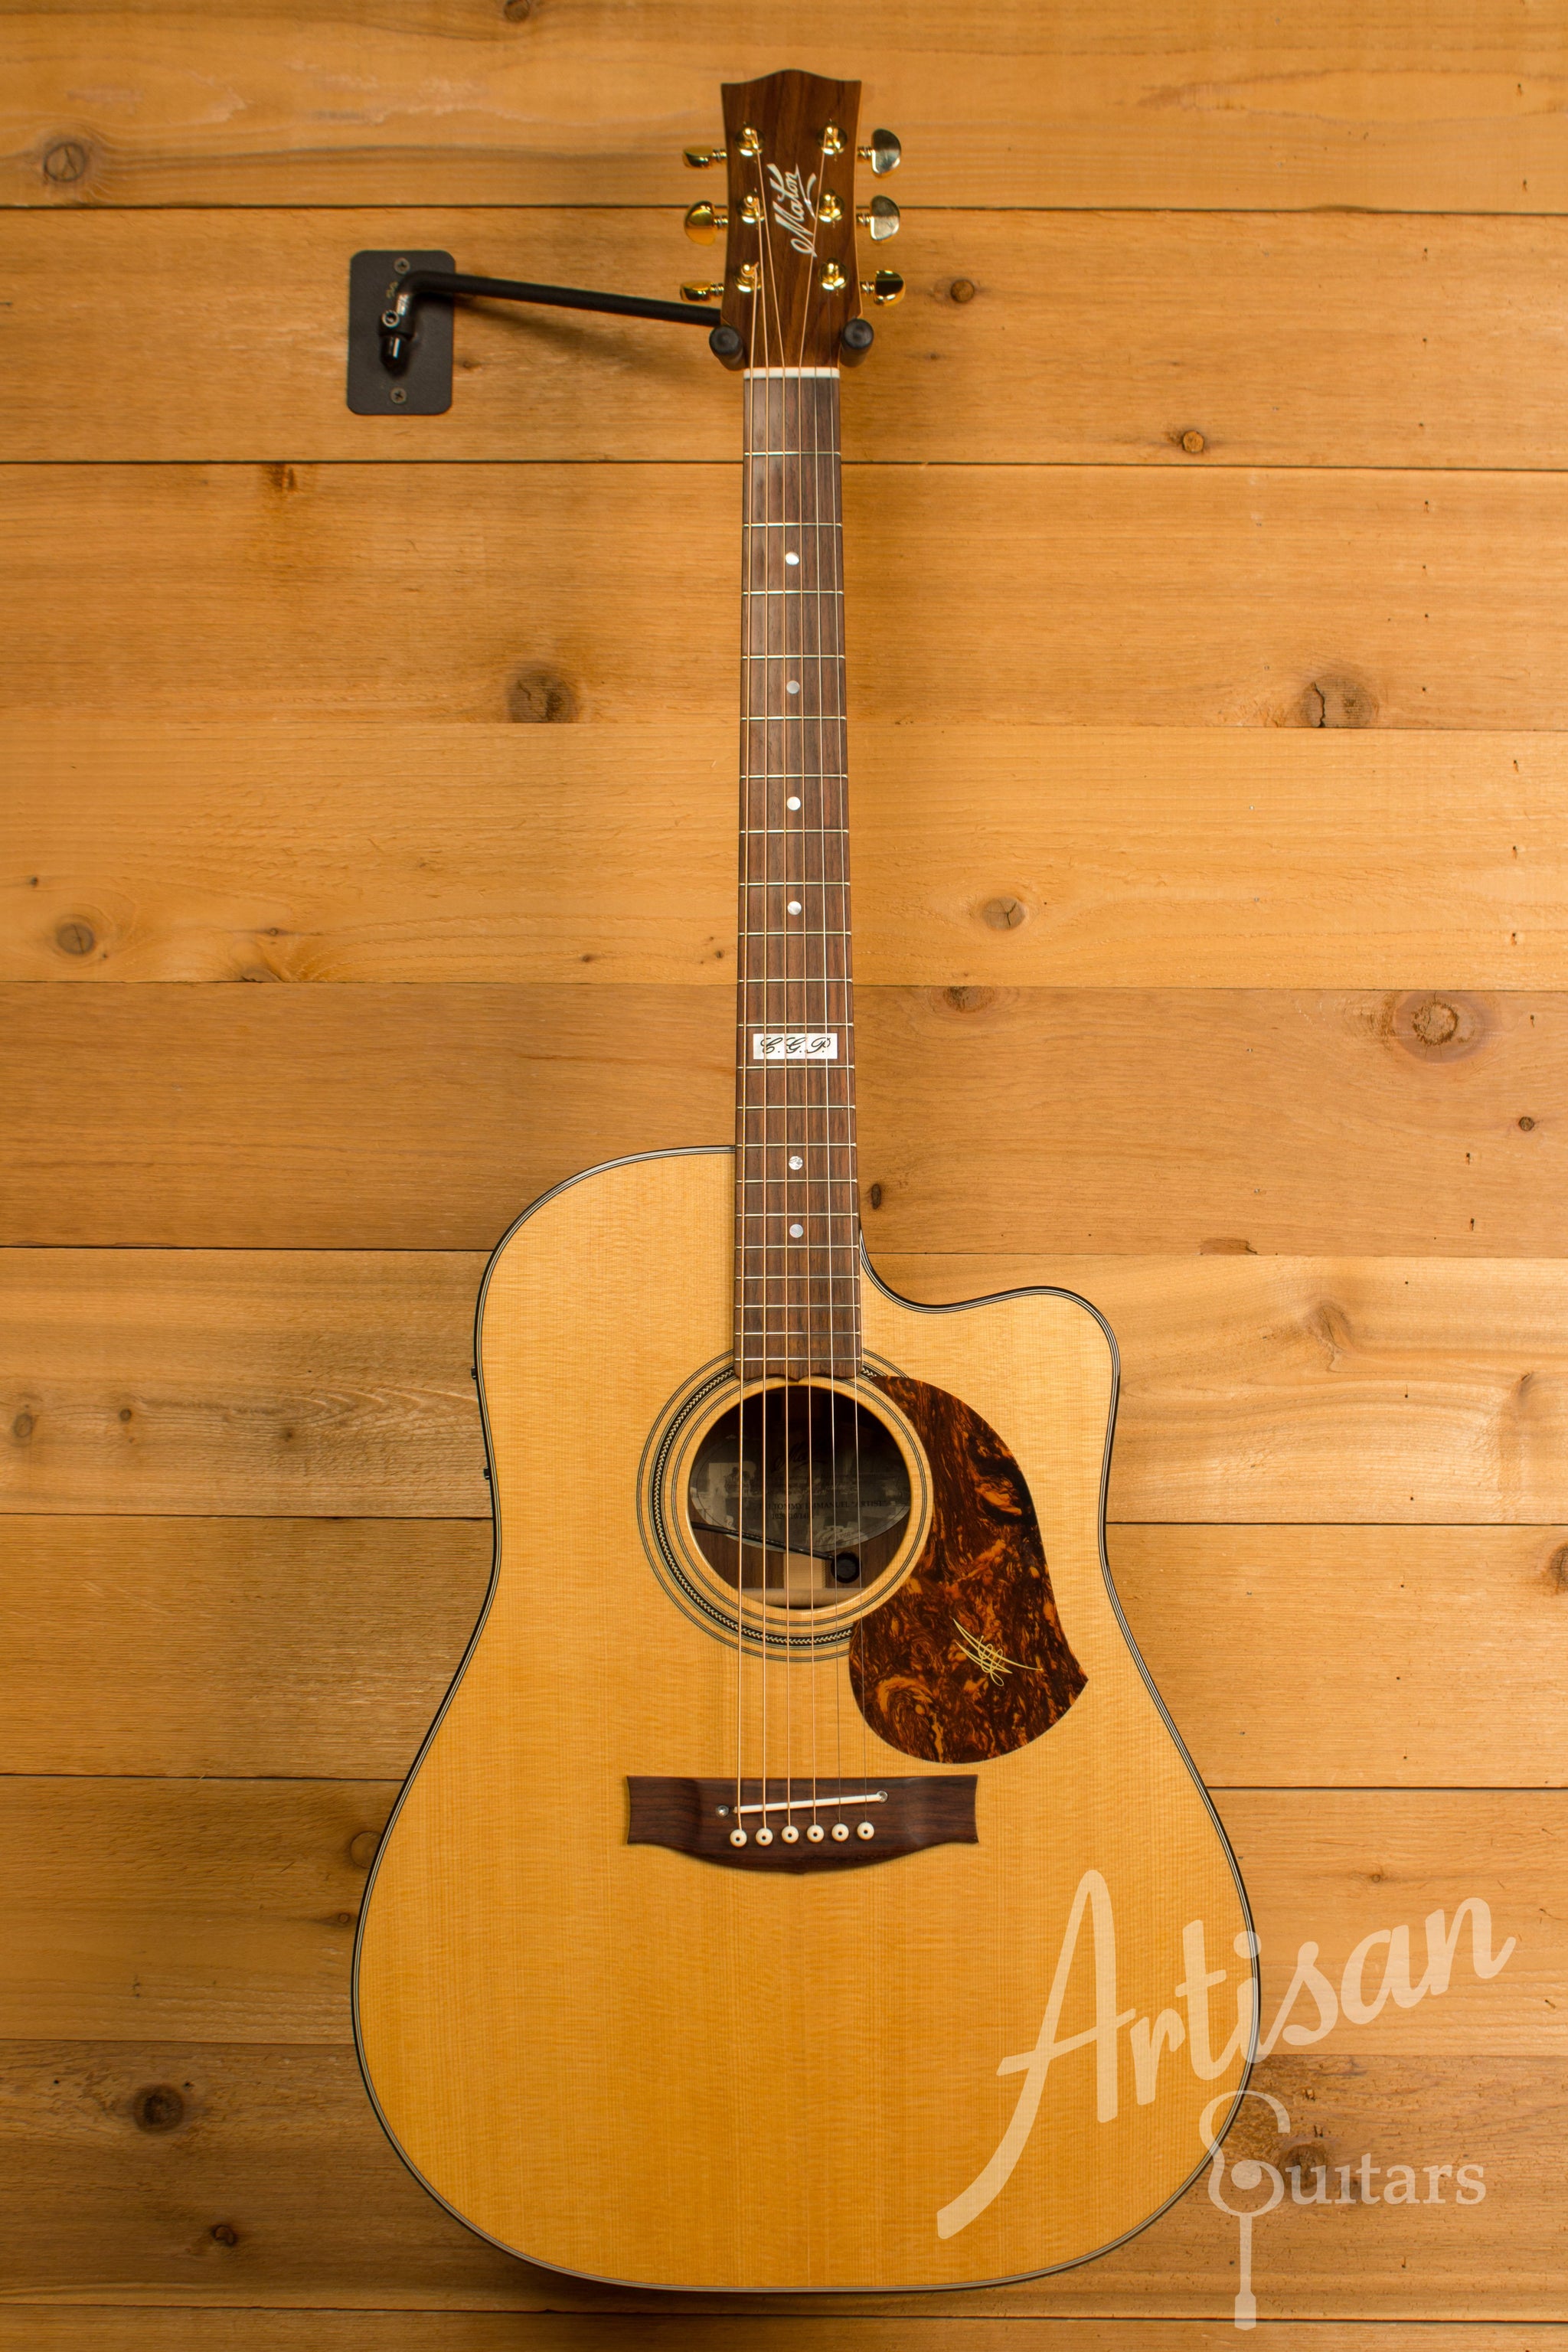 Maton TE1 Guitar Tommy Emmanuel Artist Sitka Spruce and Indian Rosewood AP5 Pro Pre-Owned 2014 ID-11323 - Artisan Guitars